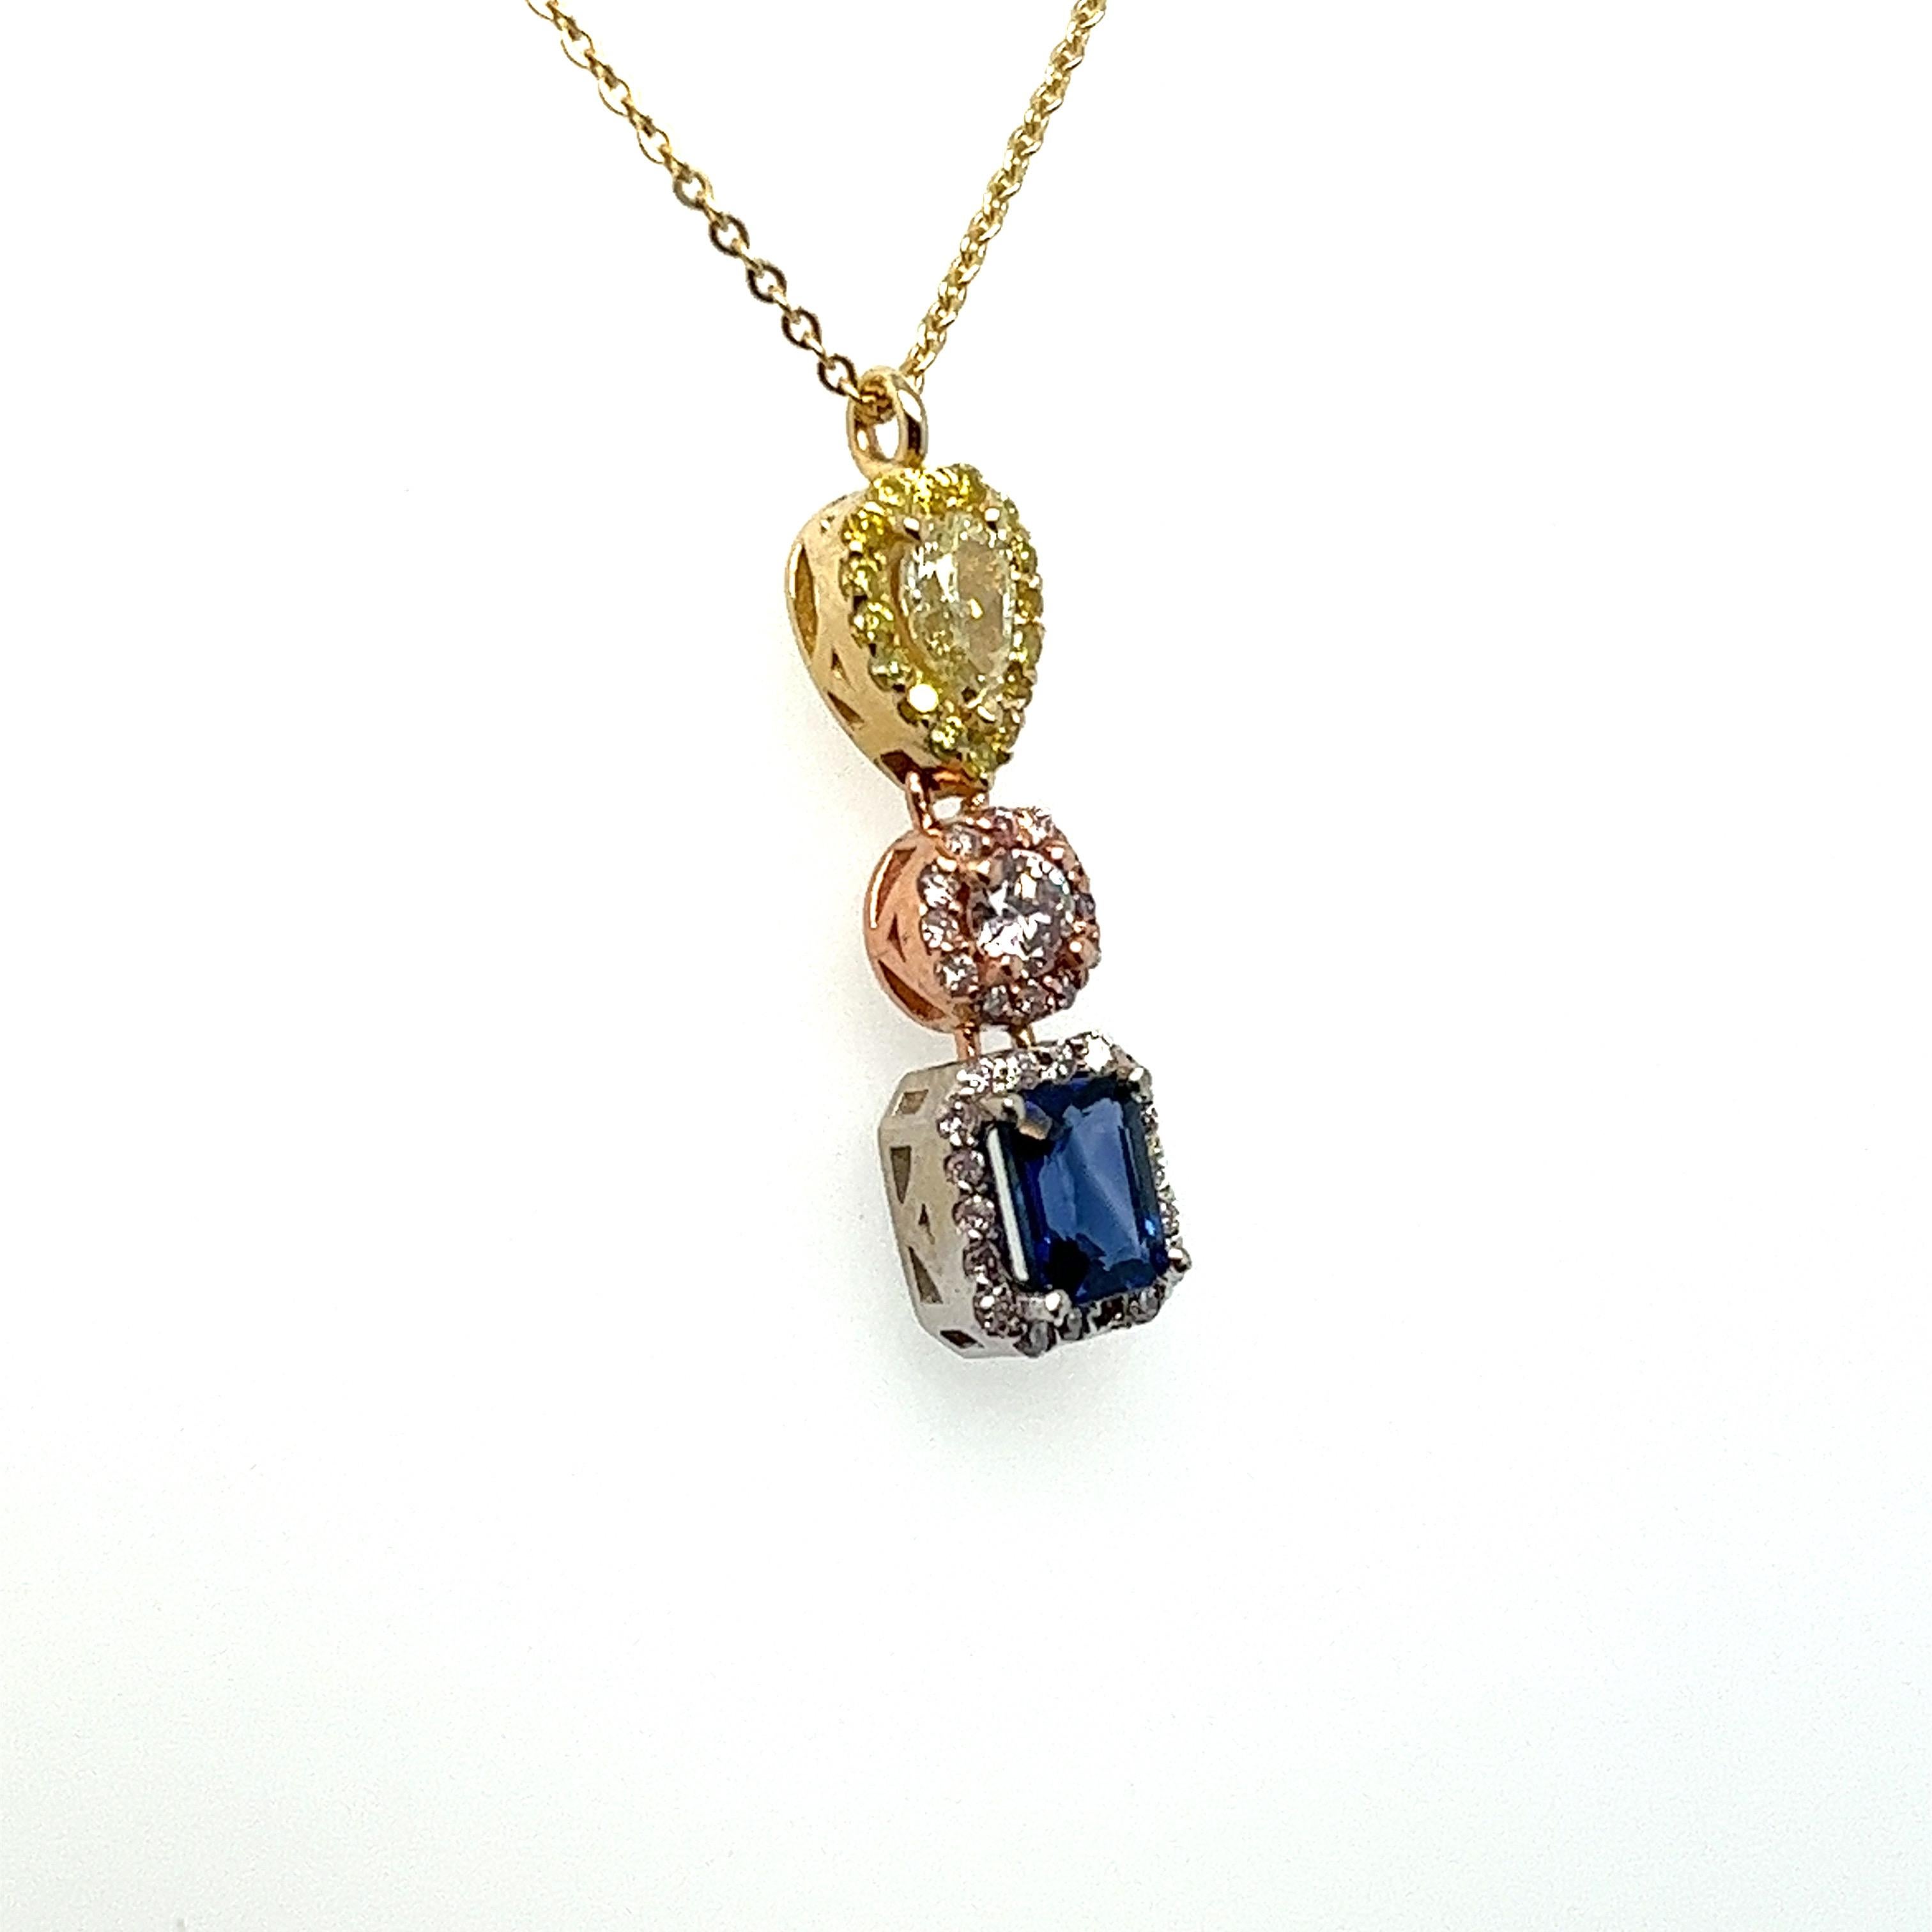 Opulent pendant made with a variety shaped natural earth mined yellow, pink, white diamonds and blue sapphire.
Pendant is handmade in solid 14kt yellow, white and rose gold on a slender yellow gold adjustable chain 16